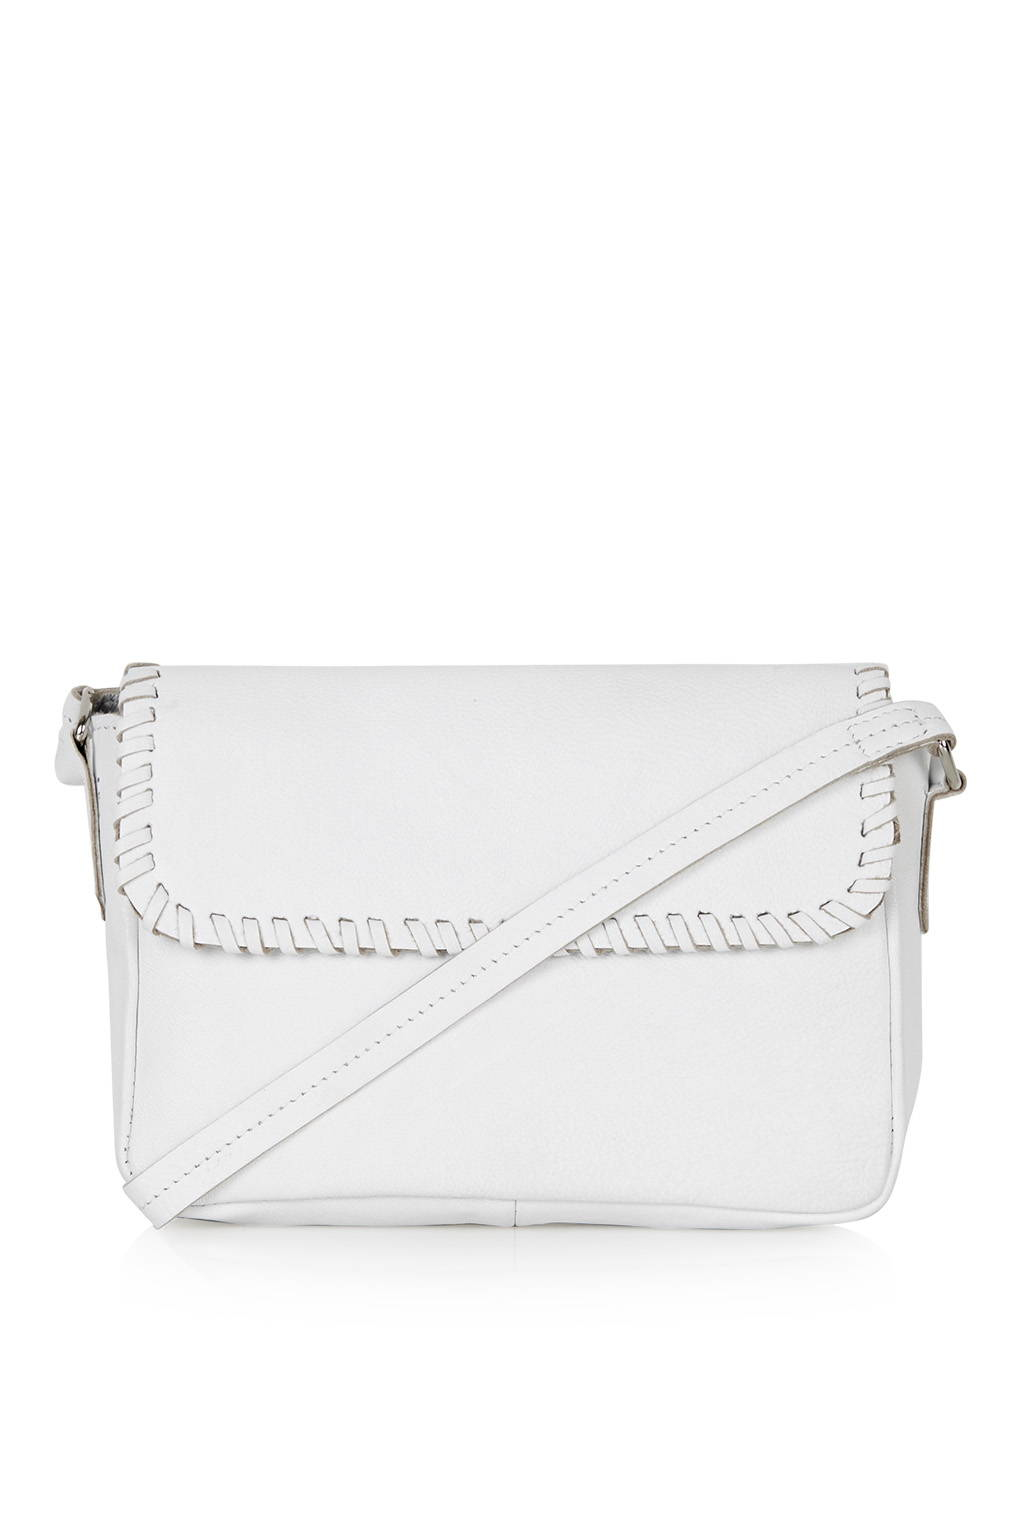 TOPSHOP Mini Leather Crossbody Bag in White - Lyst